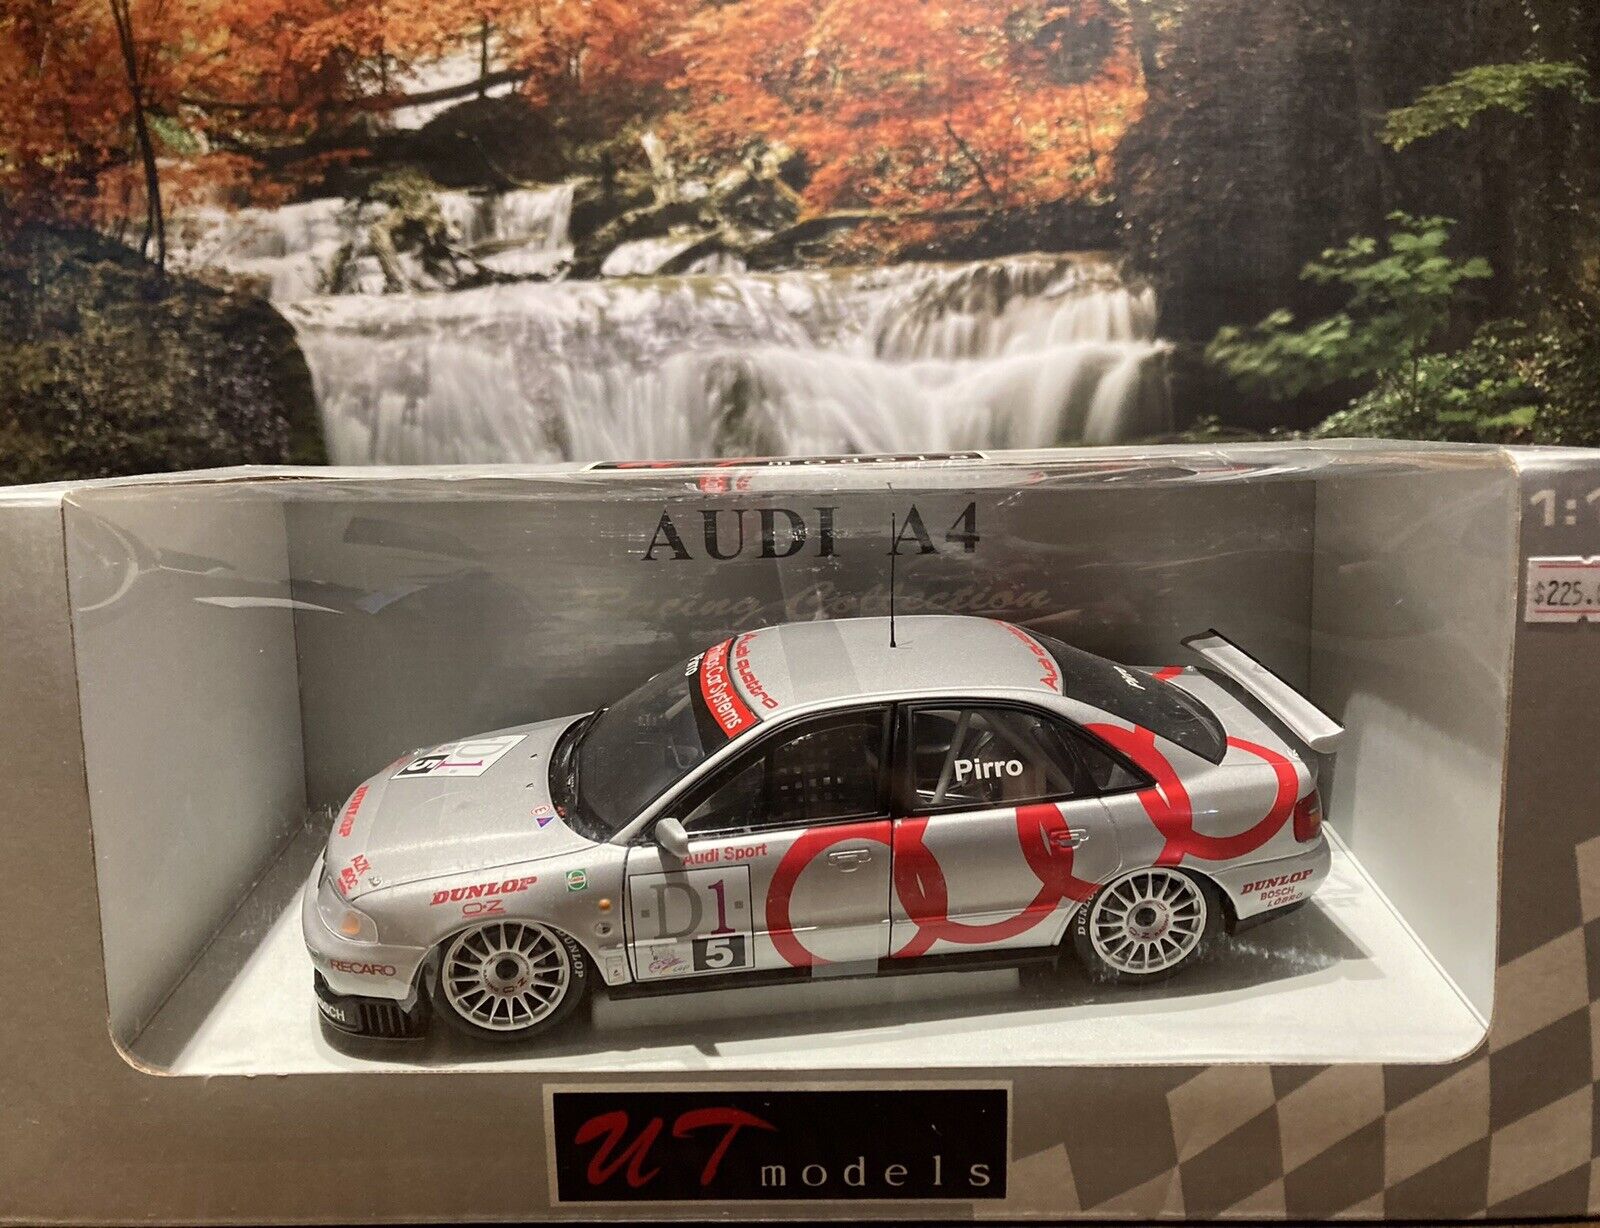 Ut Models Racing Collection 1/18 Audi A4 1996 Emanuele Pirro